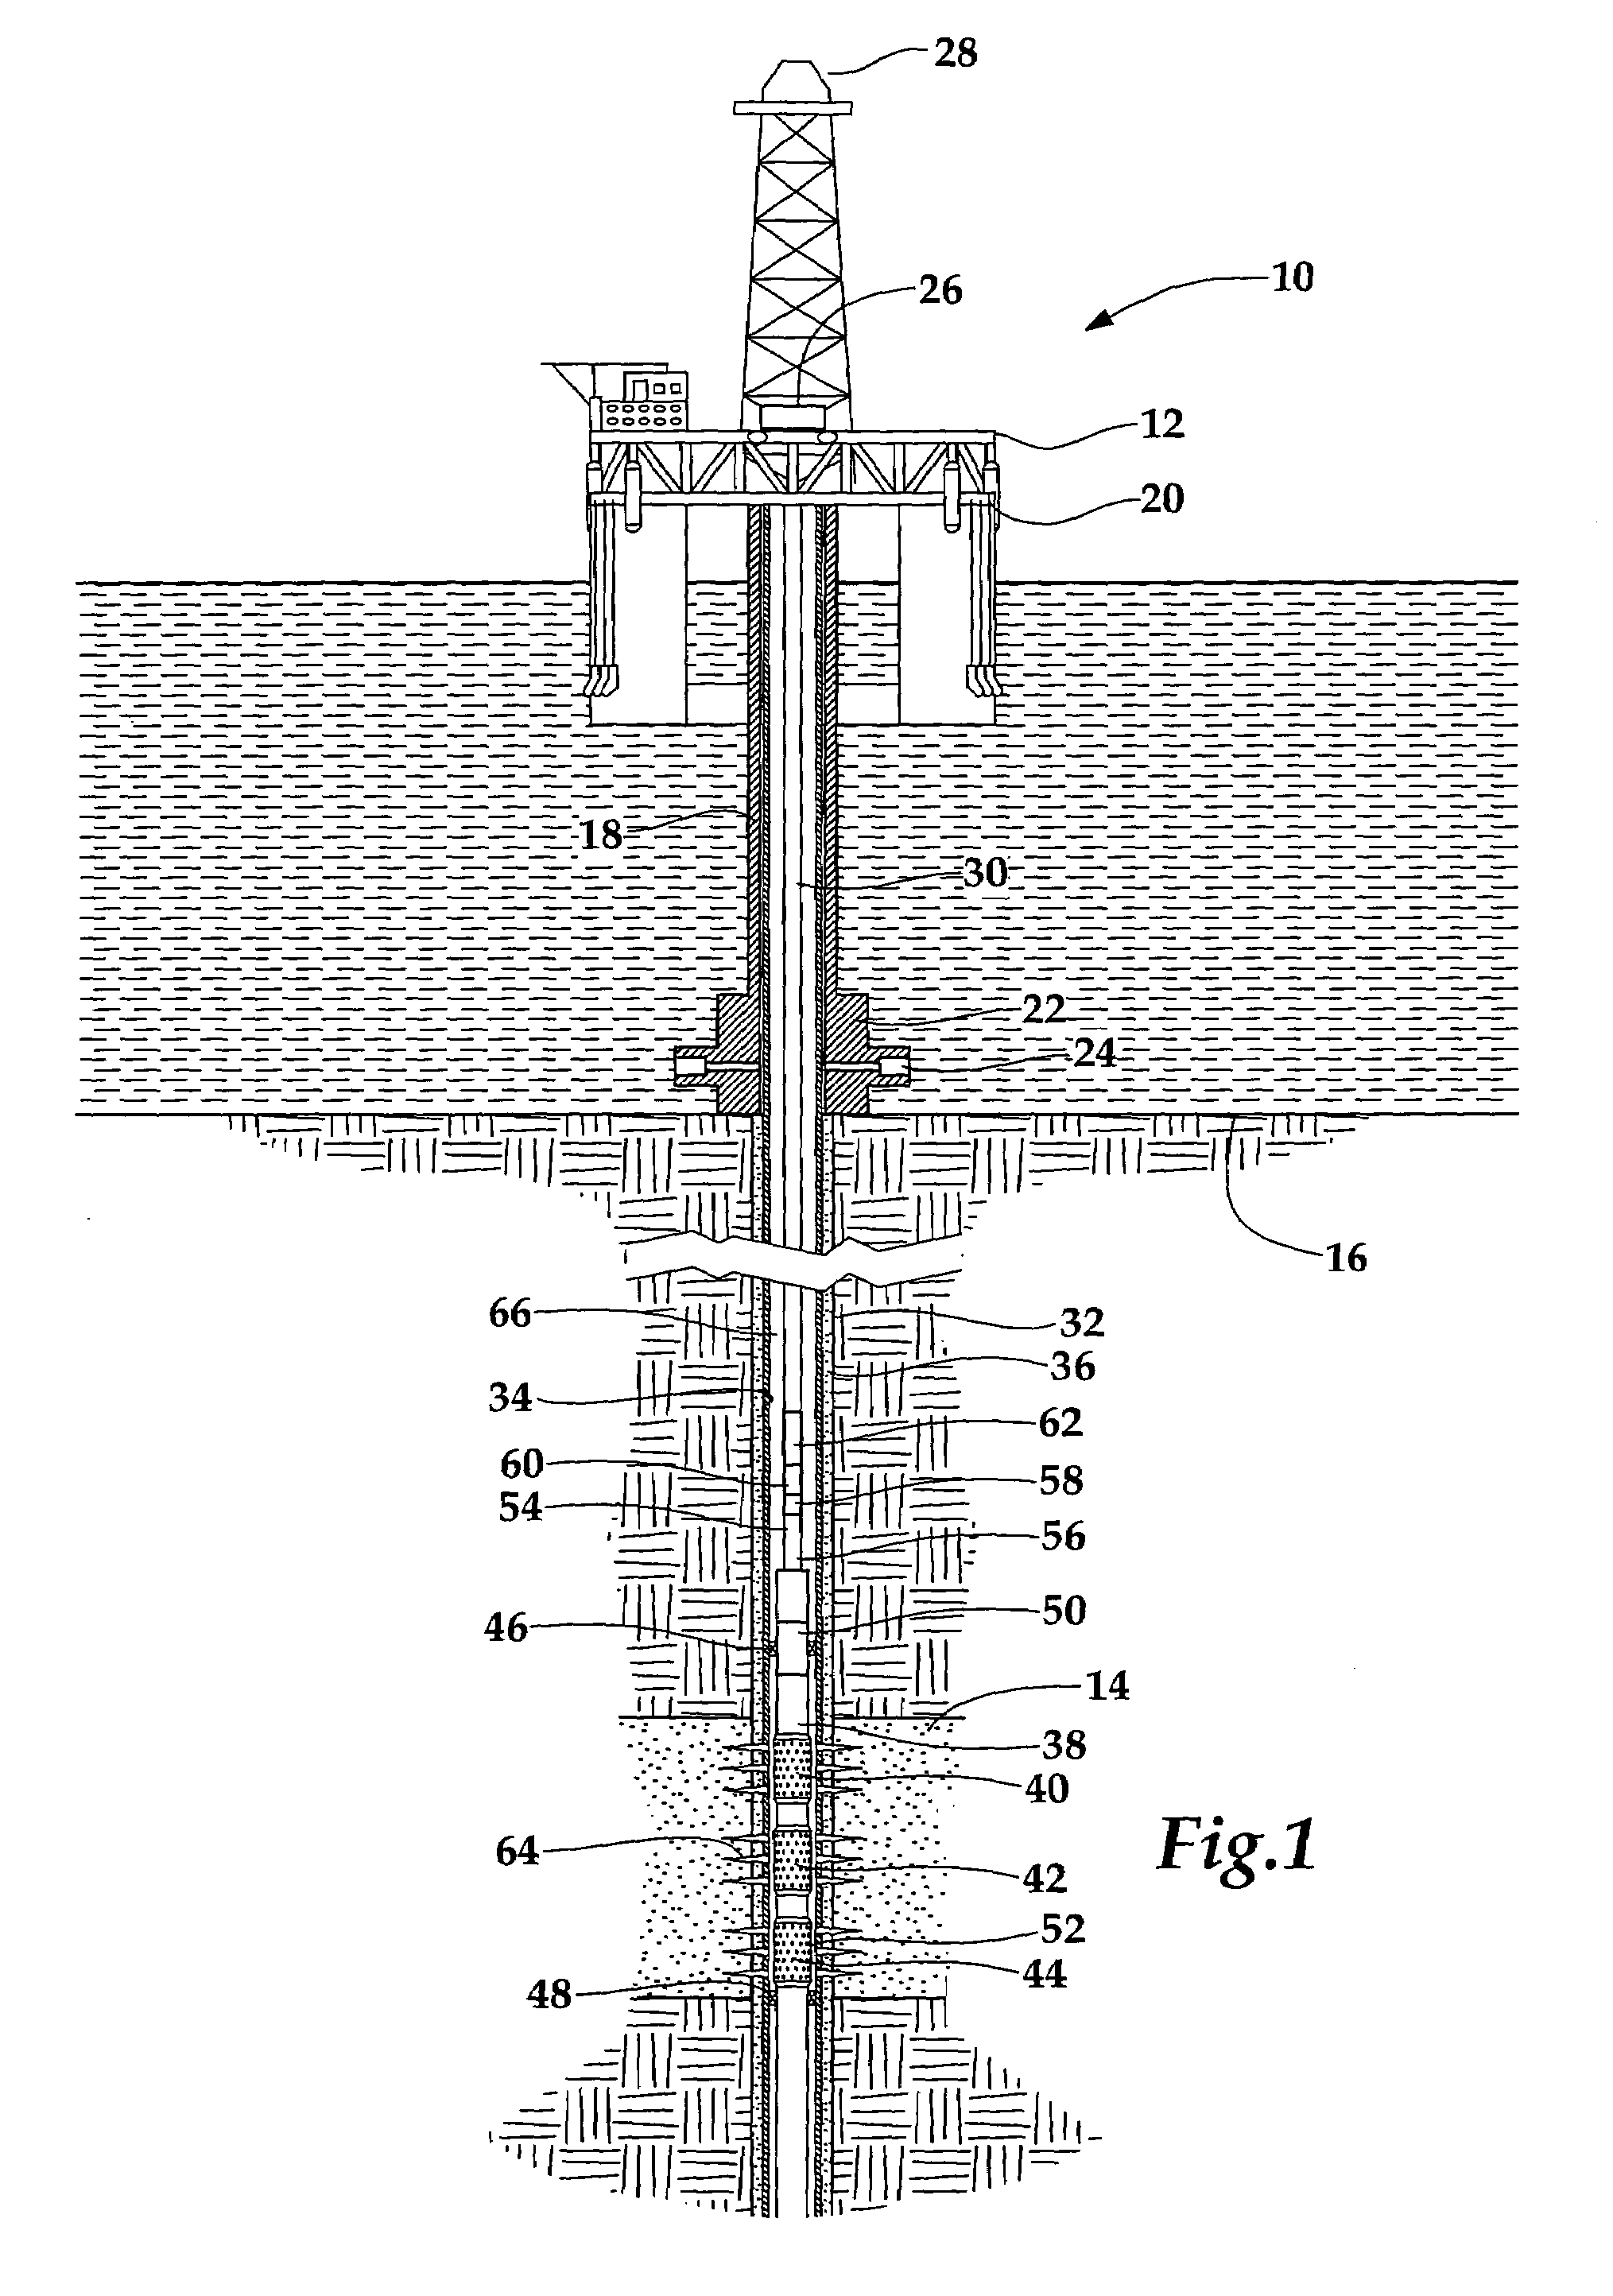 Reverse out valve for well treatment operations